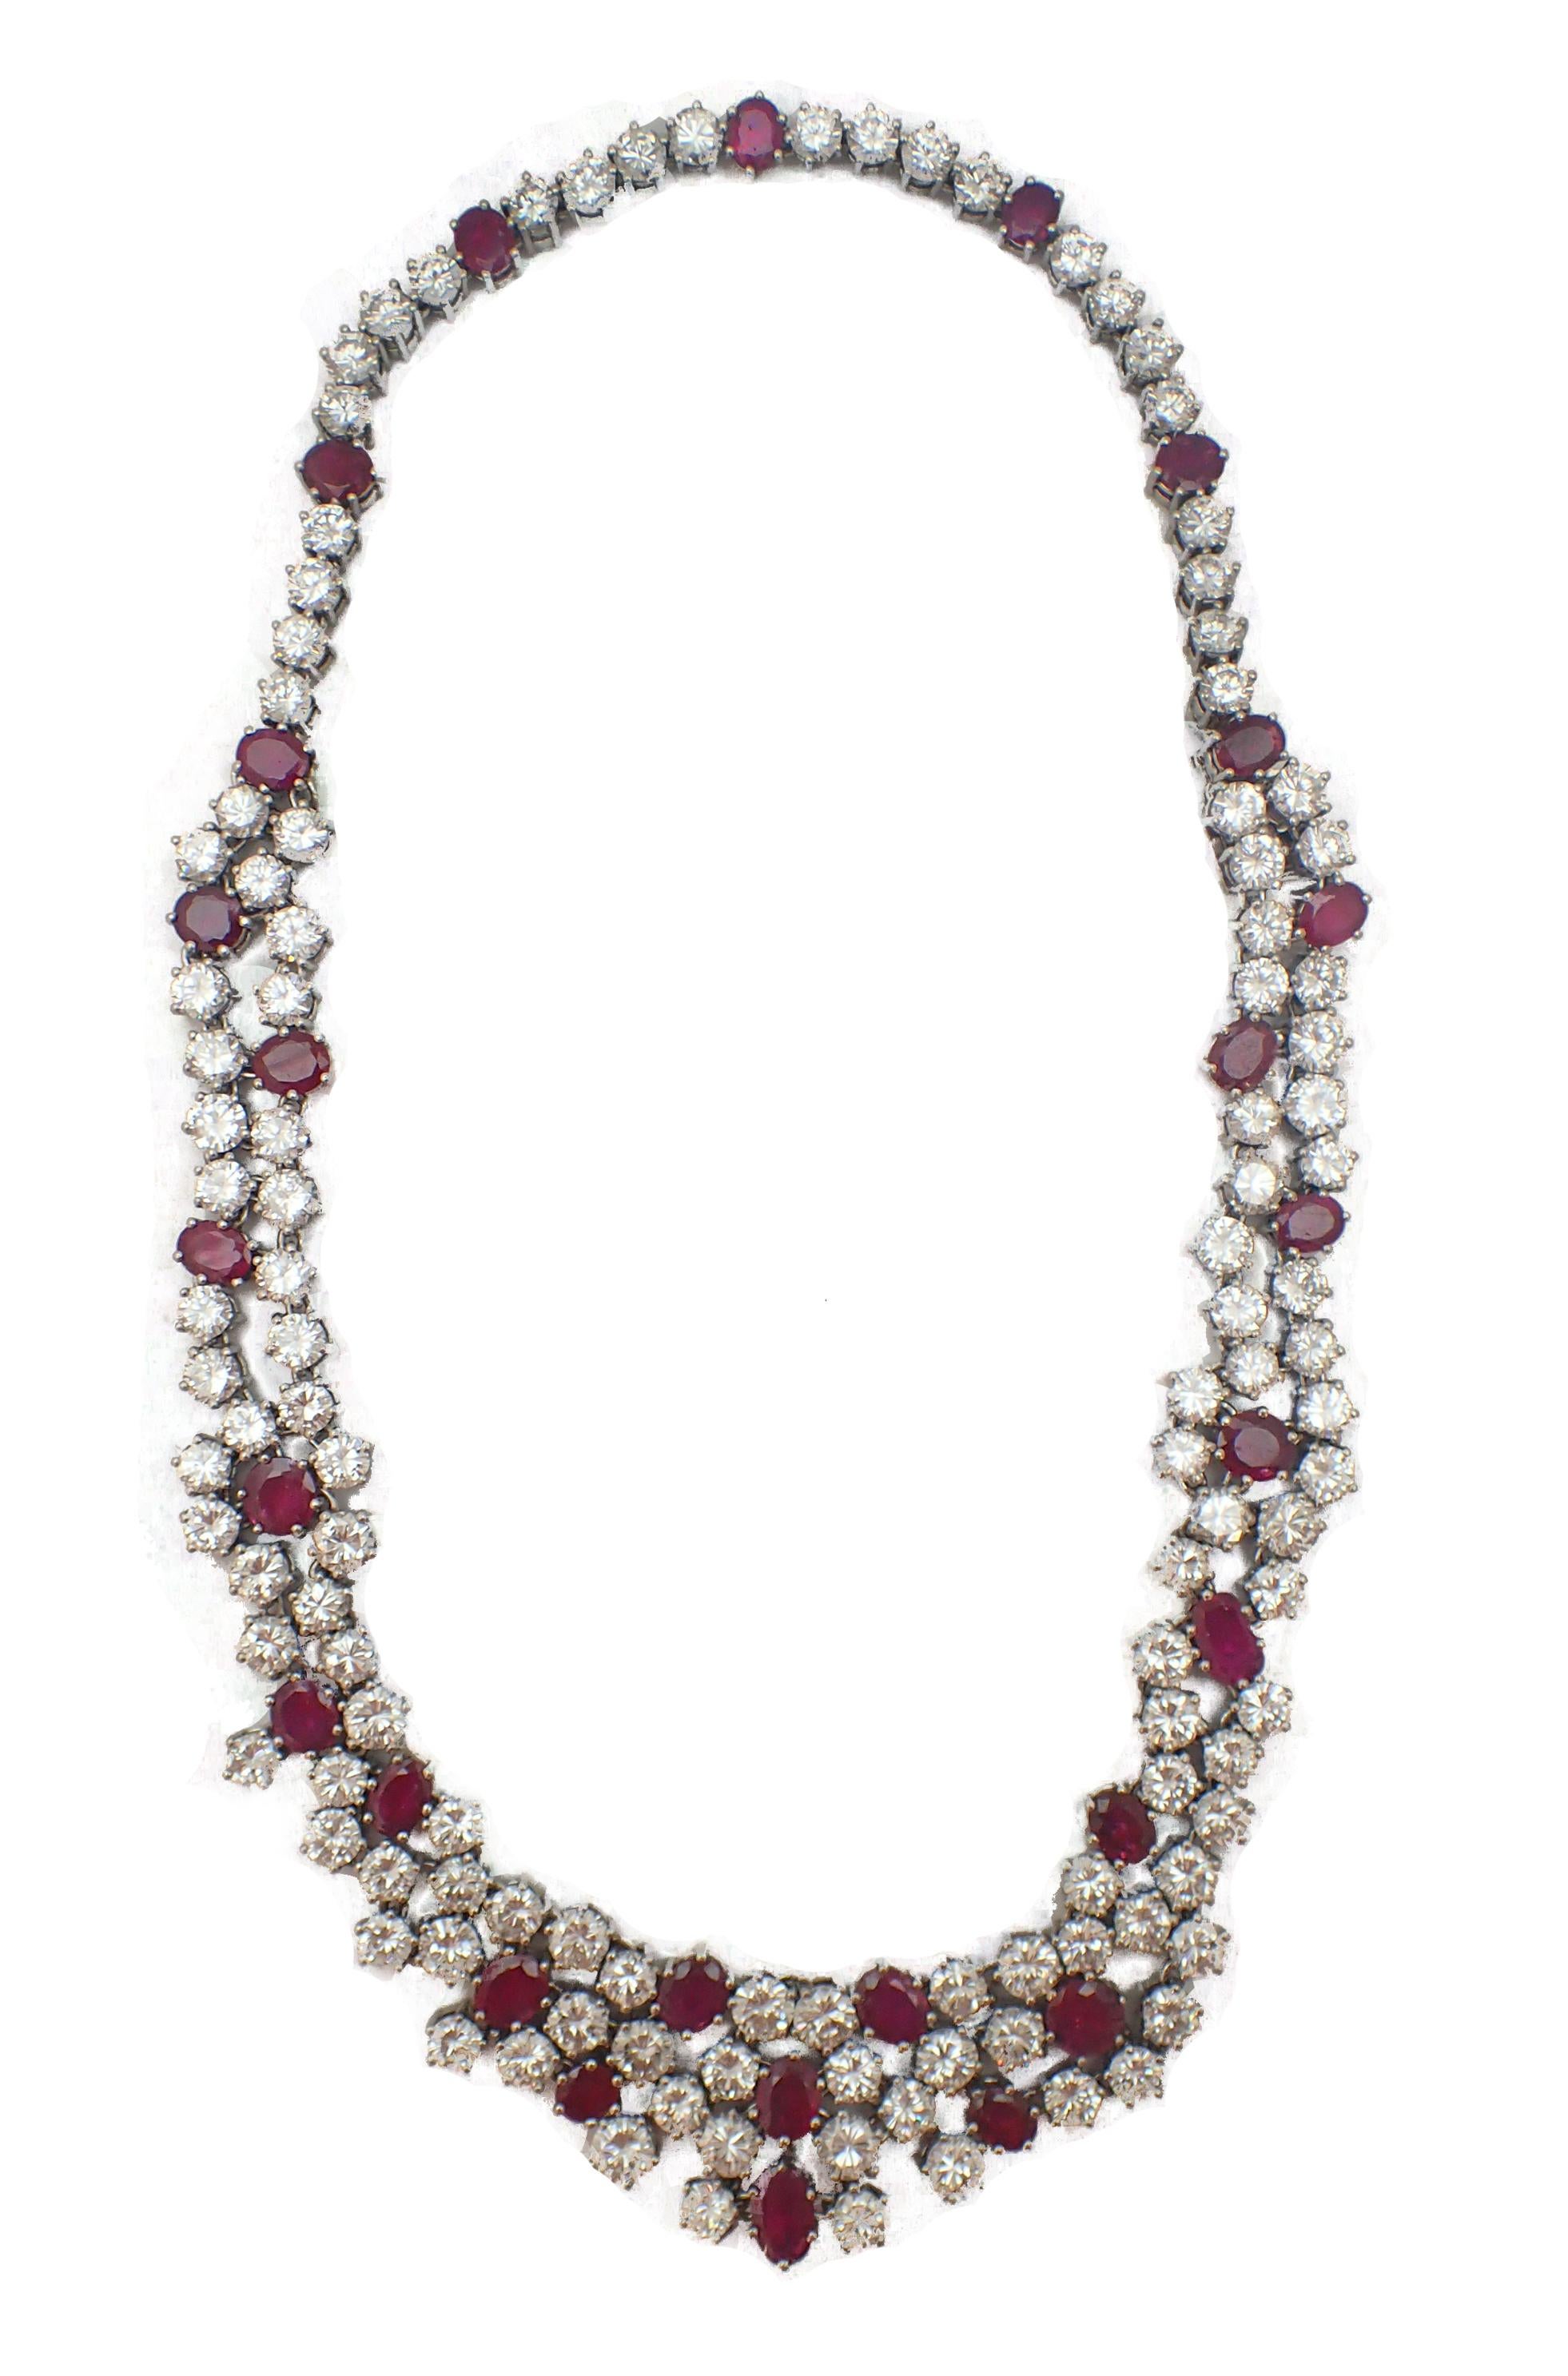 37 Carat Ruby and Diamond Necklace in Platinum In Excellent Condition For Sale In New York, NY